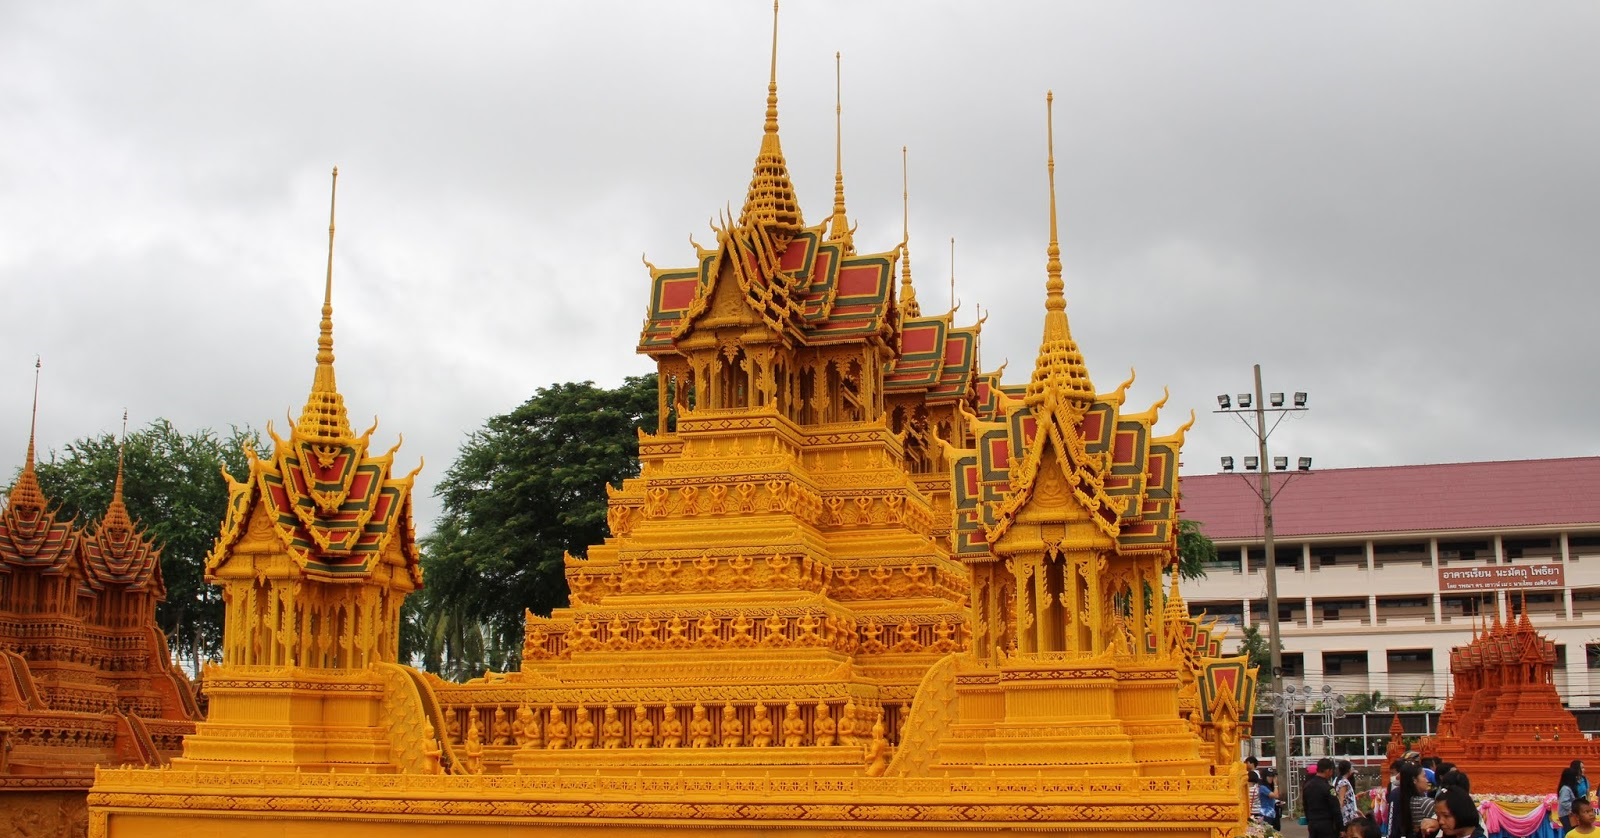 Sakon Nakhon Wax Castle Festival - What to Expect for Thailand’s Weather in October